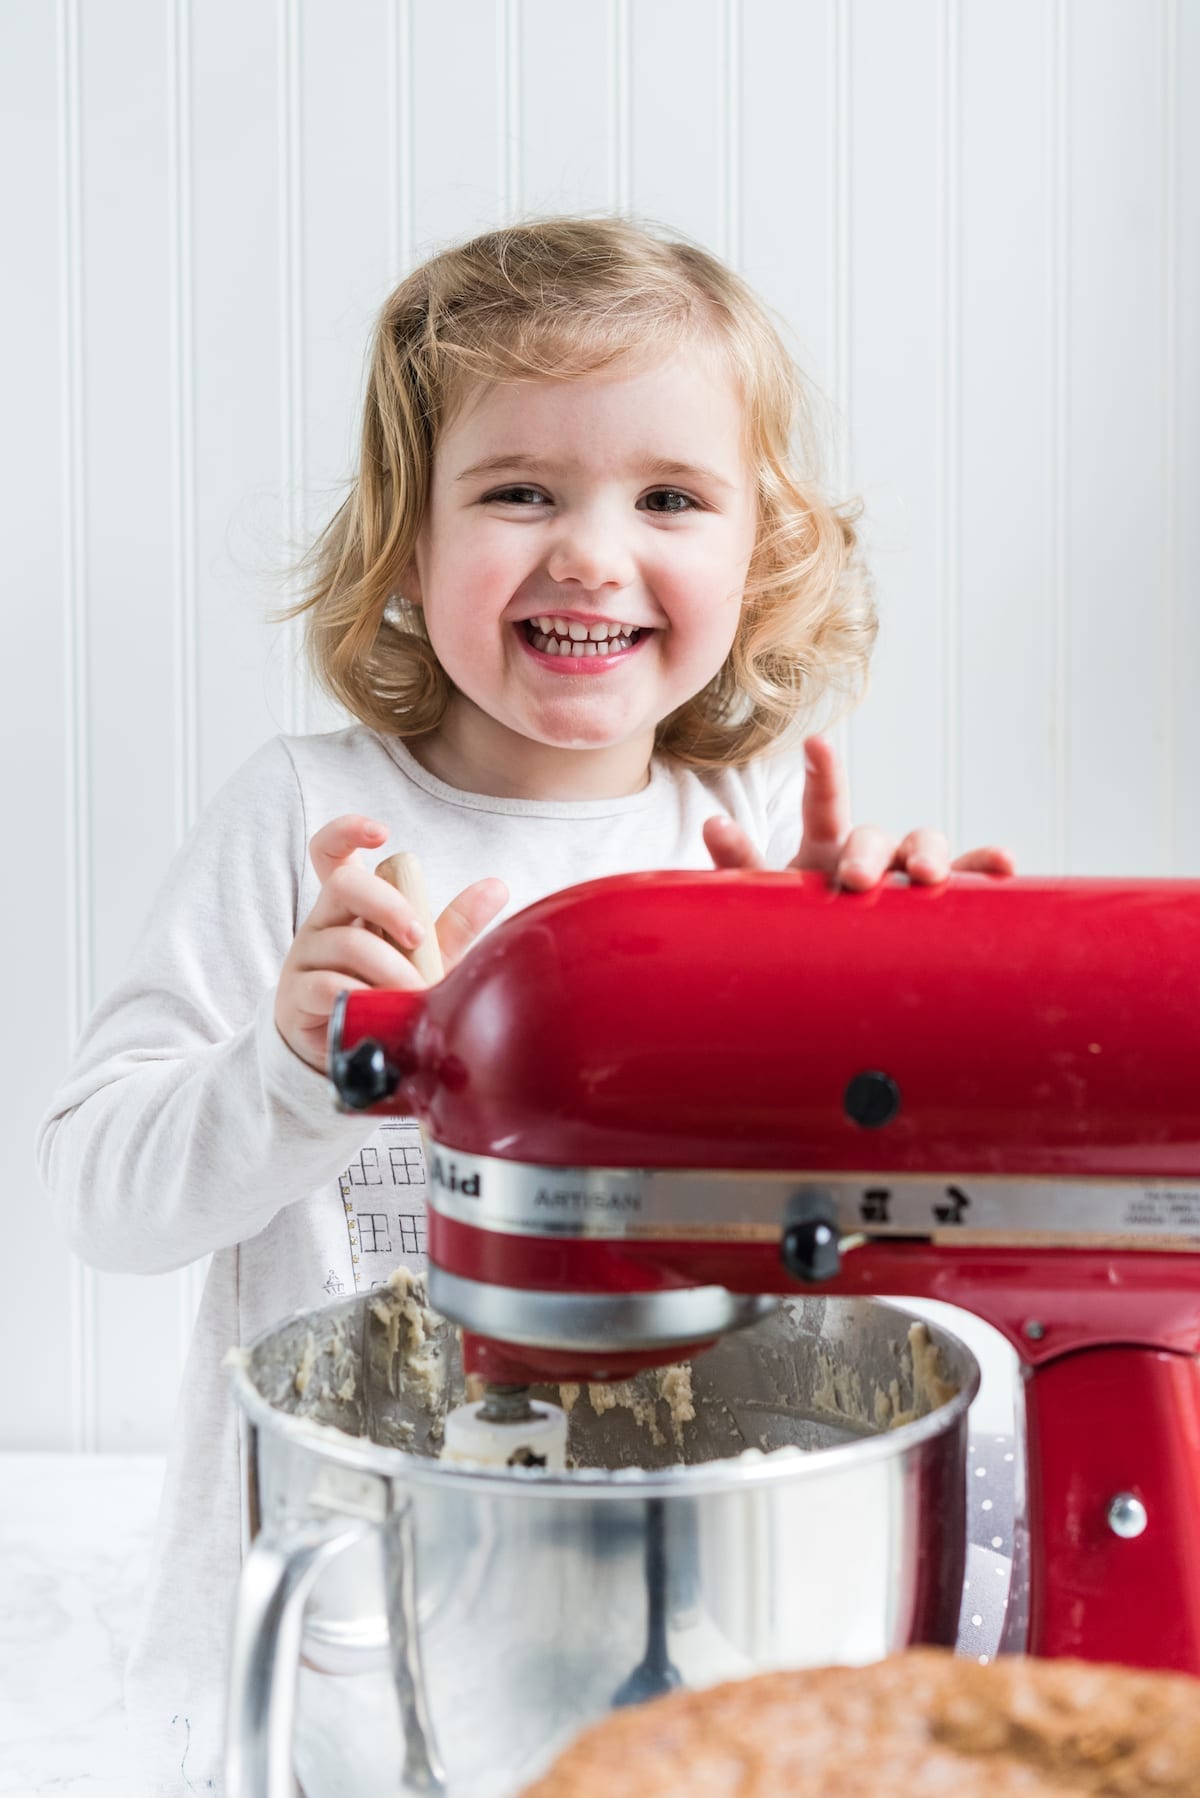 Tips for Baking with Kids and Easy Baking Recipes for Kids | Christmas entertaining, Christmas baking, Christmas cookie recipes and entertaining tips from entertaining blog @cydconverse